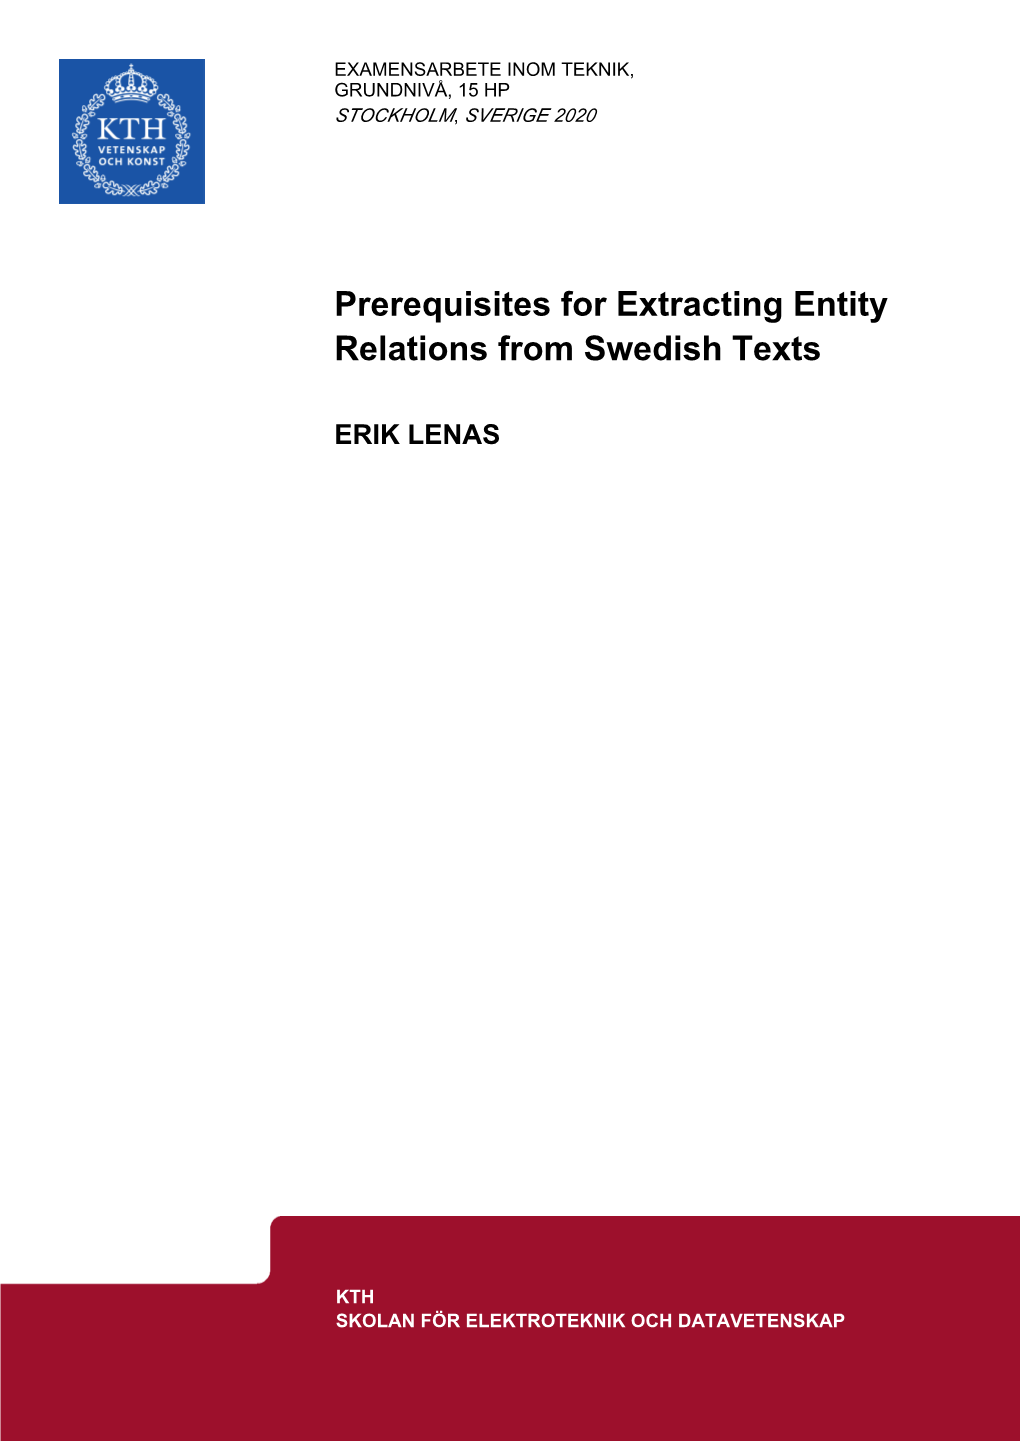 Prerequisites for Extracting Entity Relations from Swedish Texts